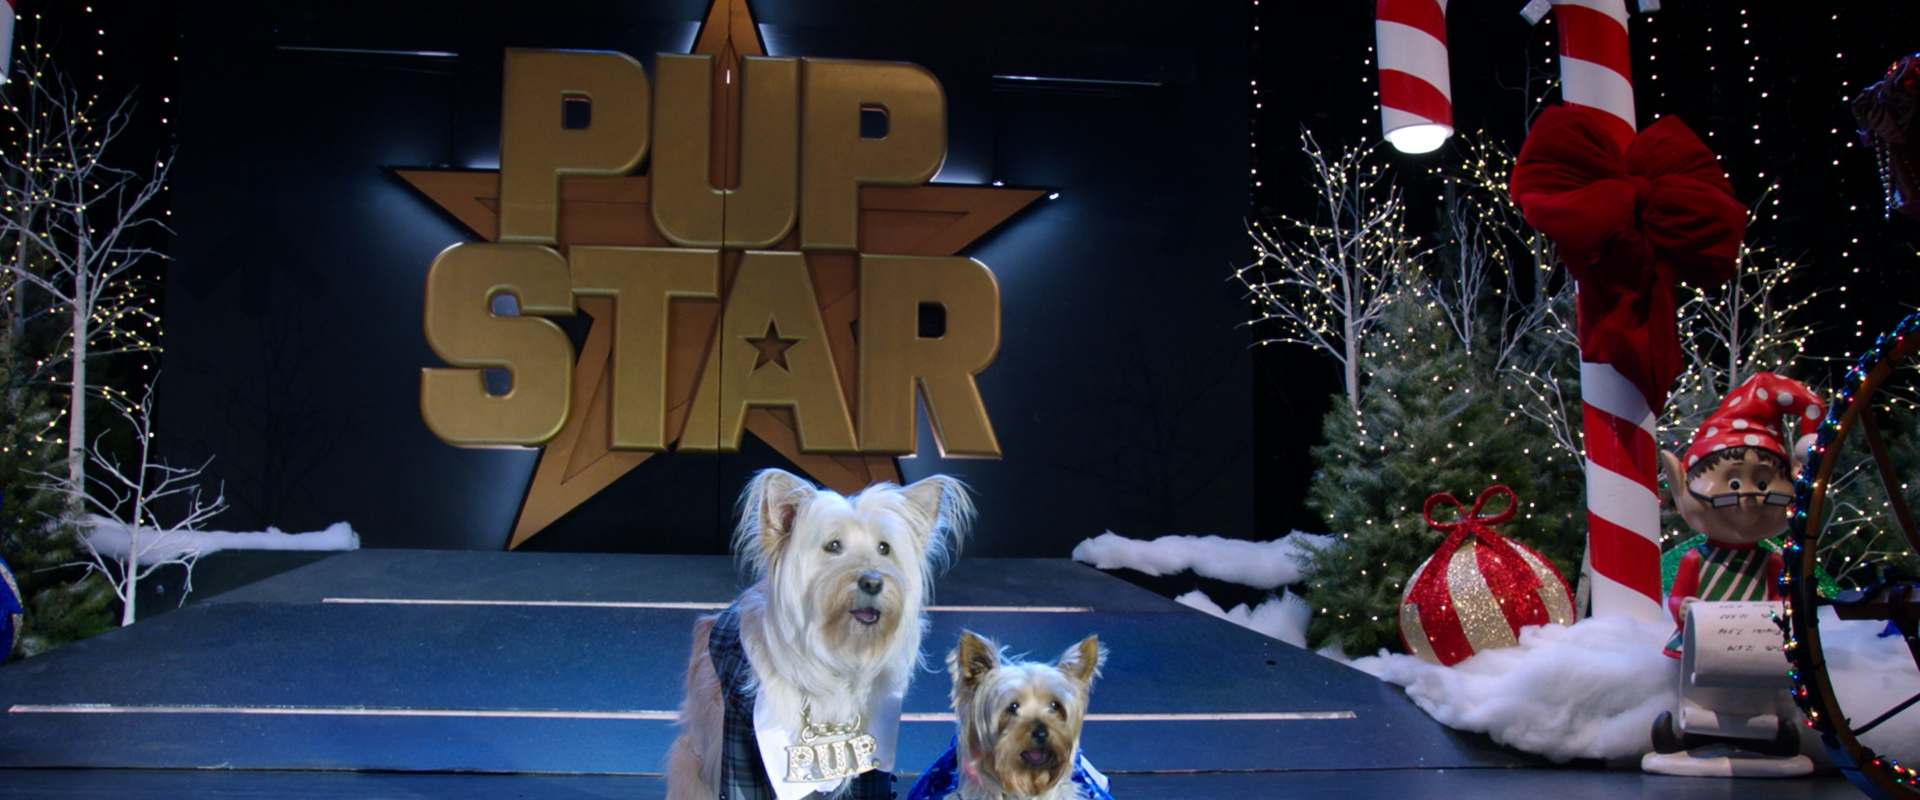 Puppy Star Christmas background 1